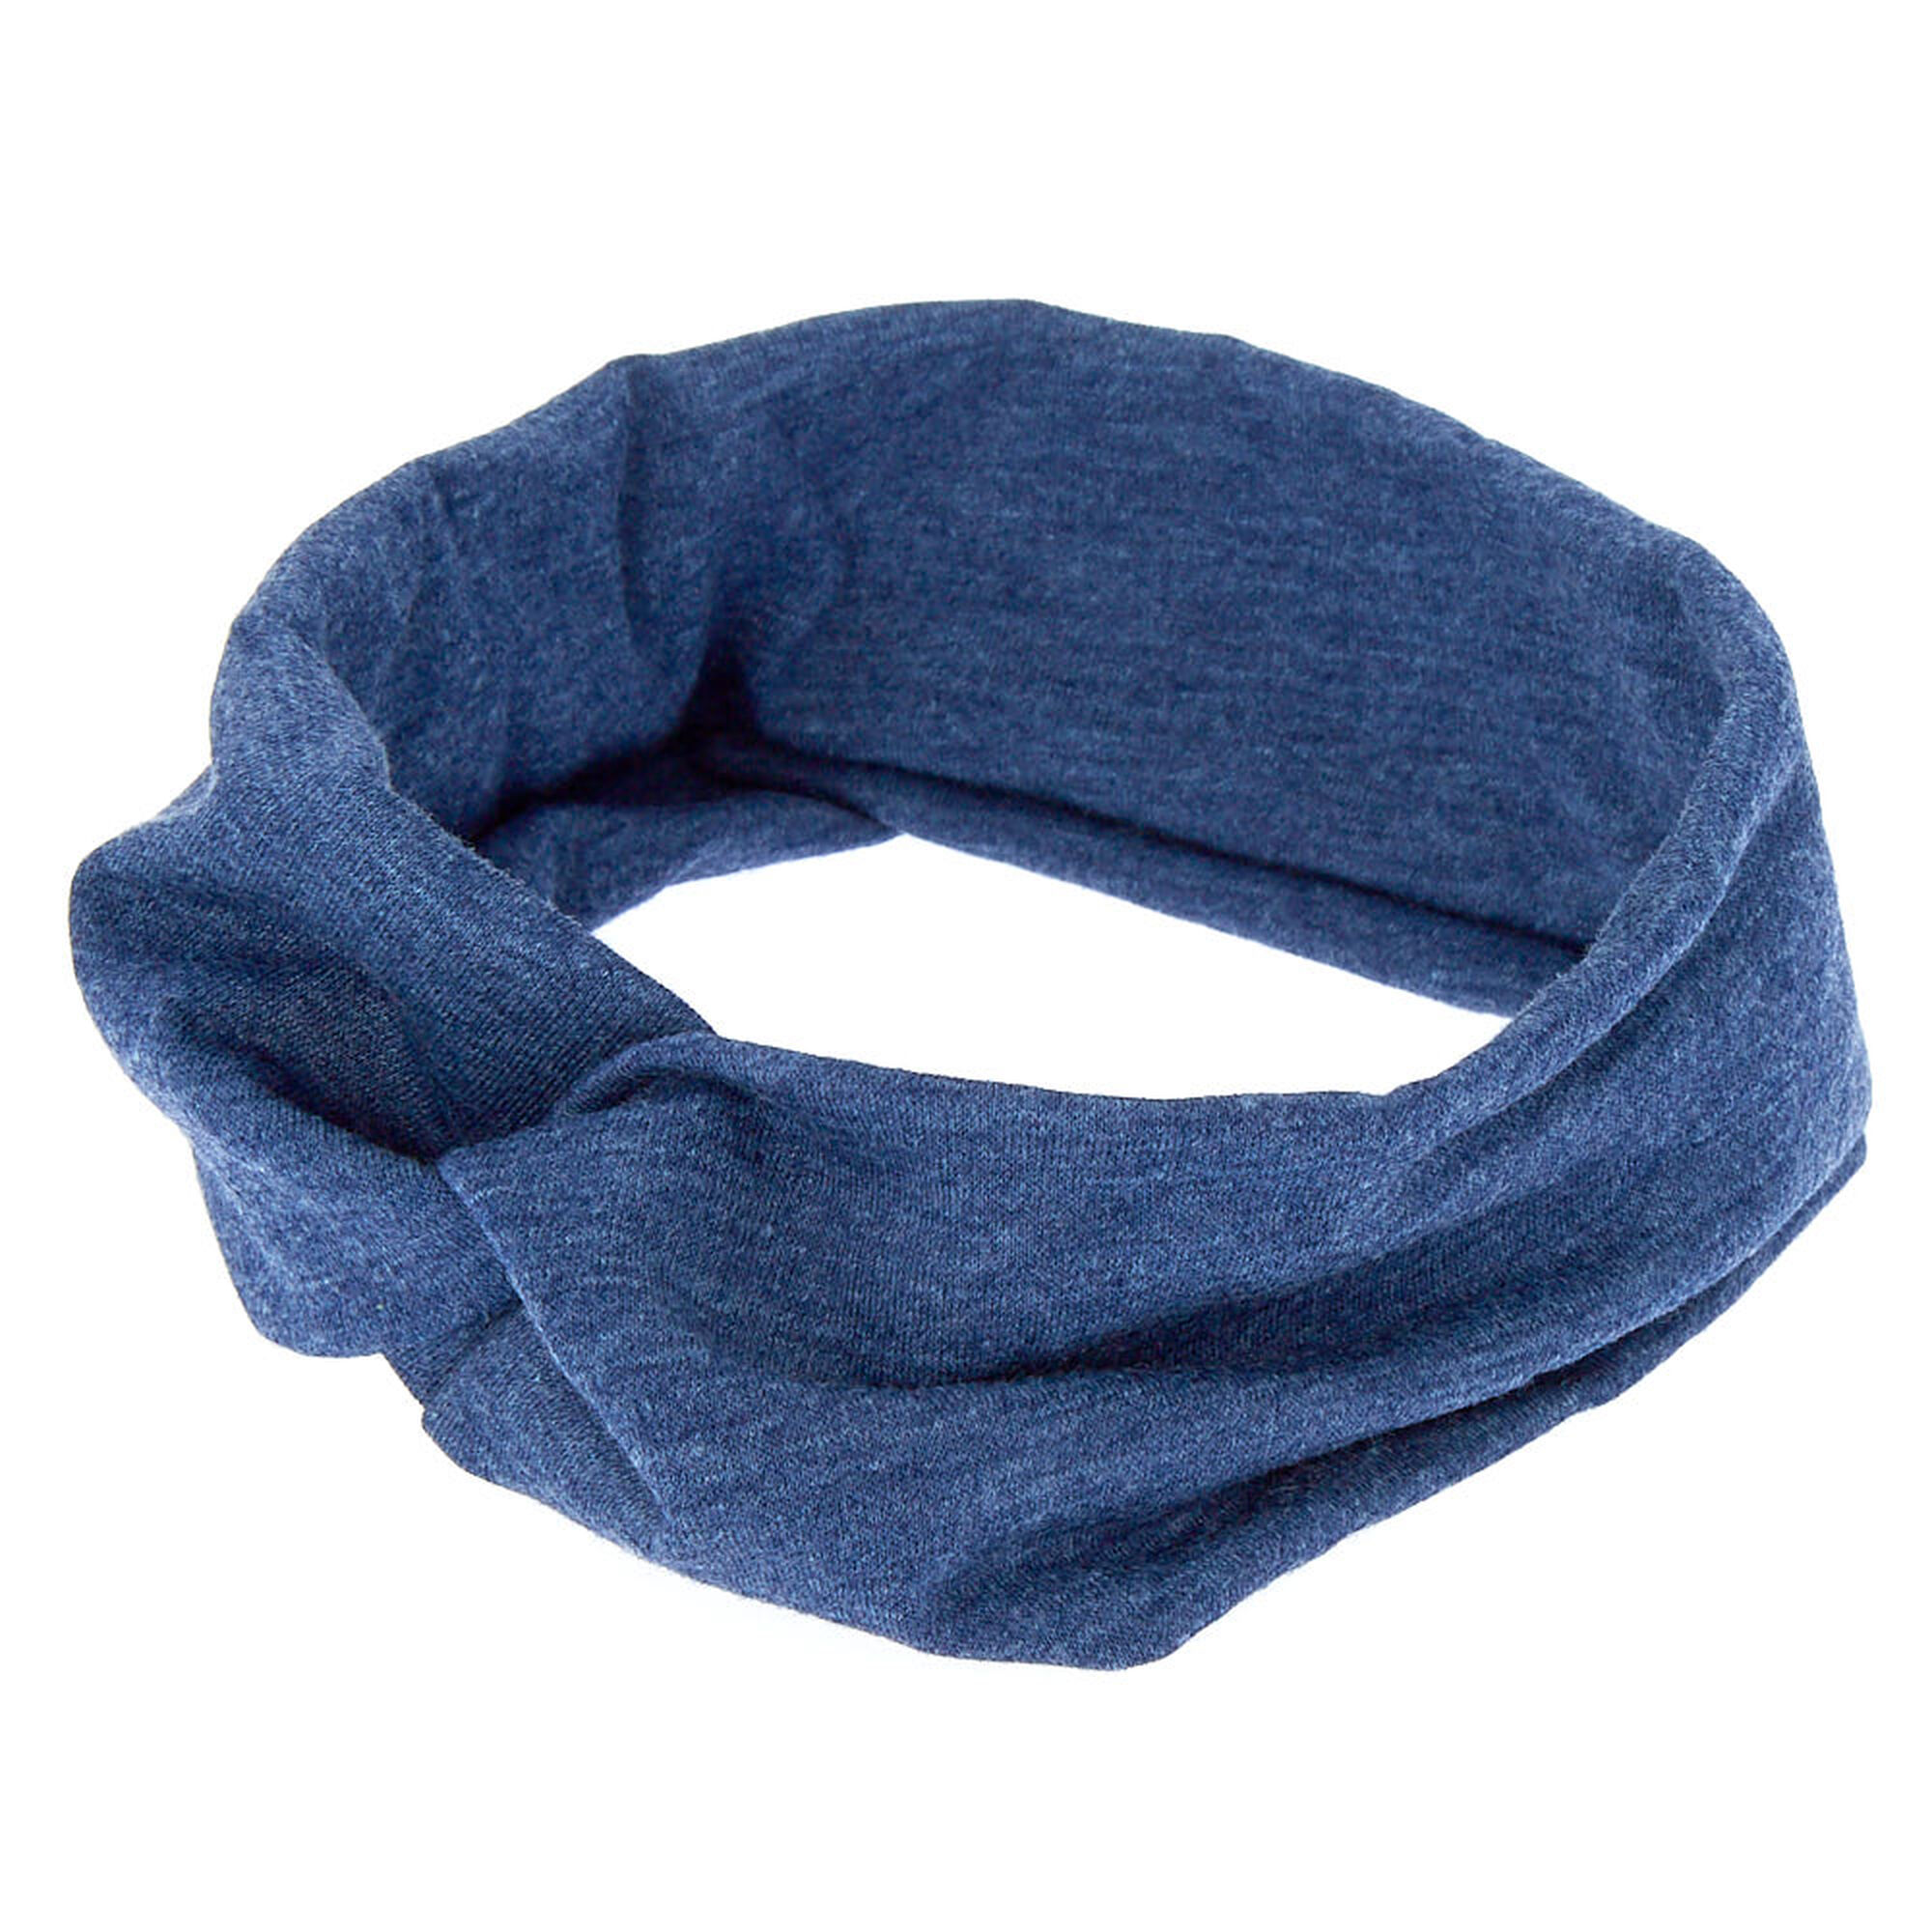 View Claires Wide Jersey Twisted Headwrap Navy information